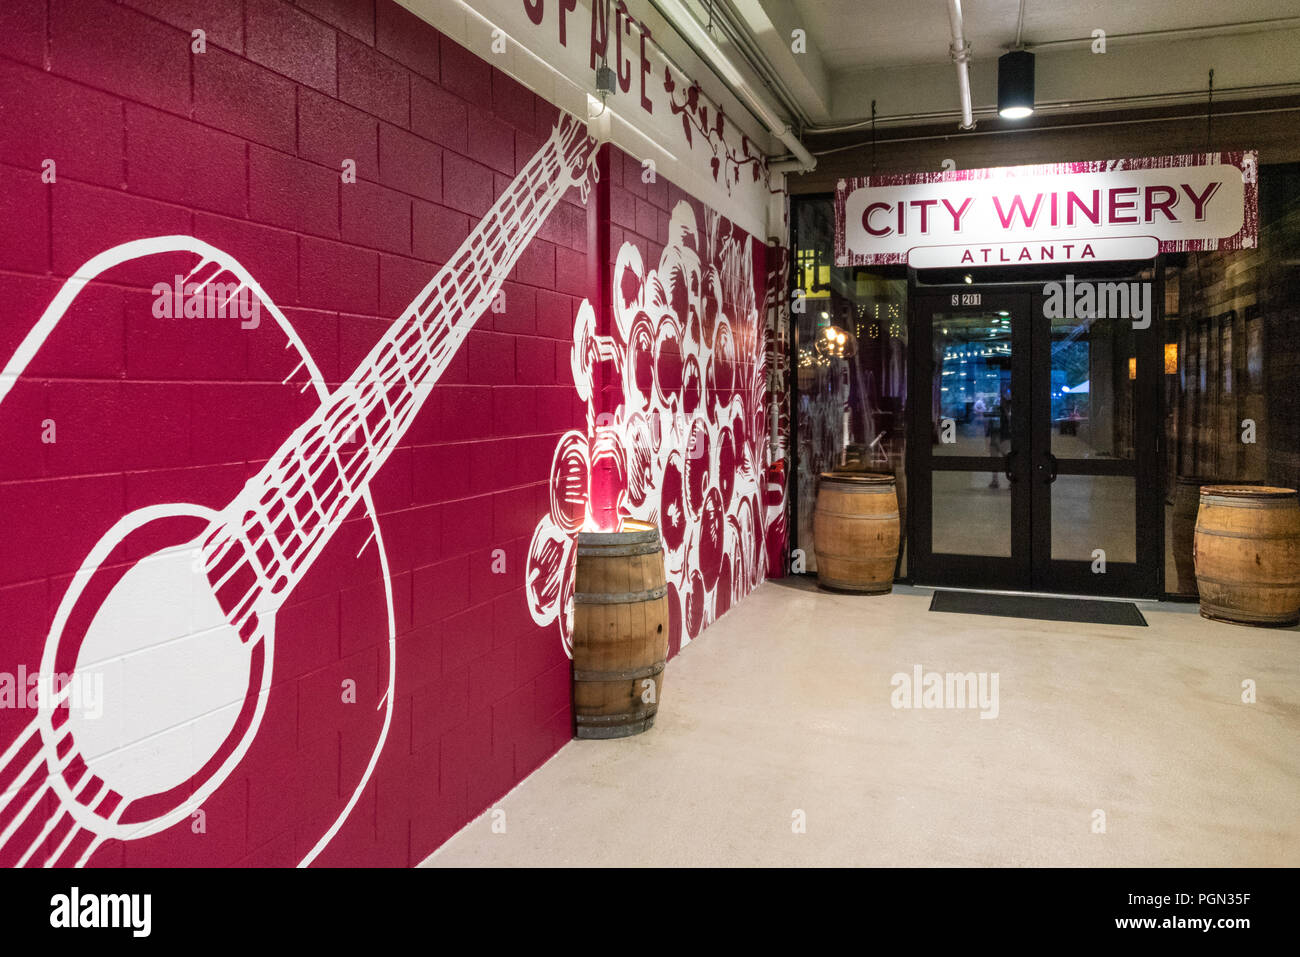 City Winery Atlanta, located at the Ponce City Market, is a premier intimate music venue combined with a fully functioning winery and restaurant. Stock Photo